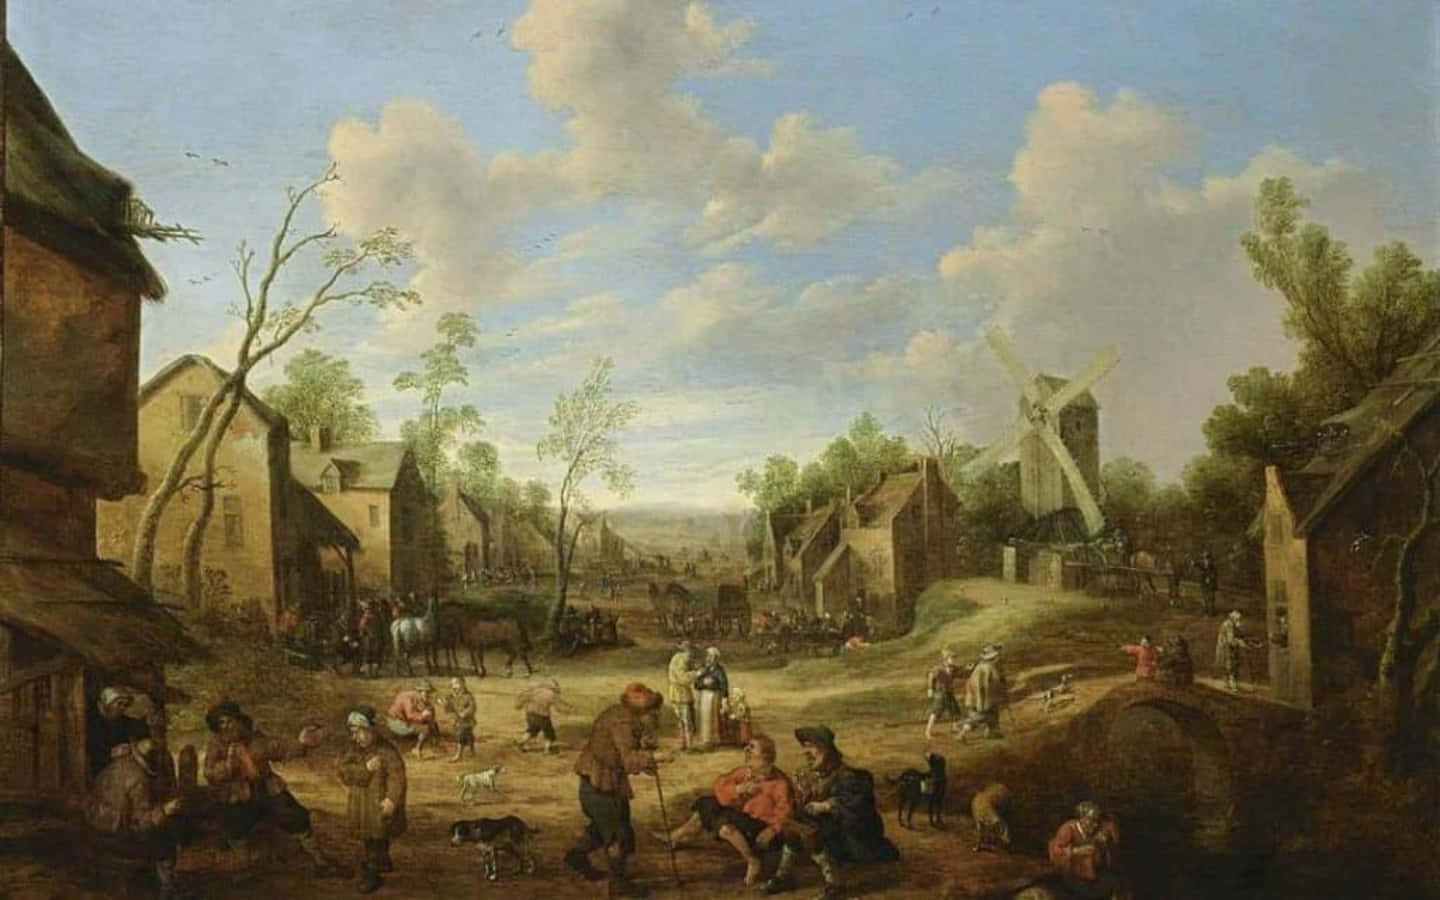 a painting shows people in a village with a windmill